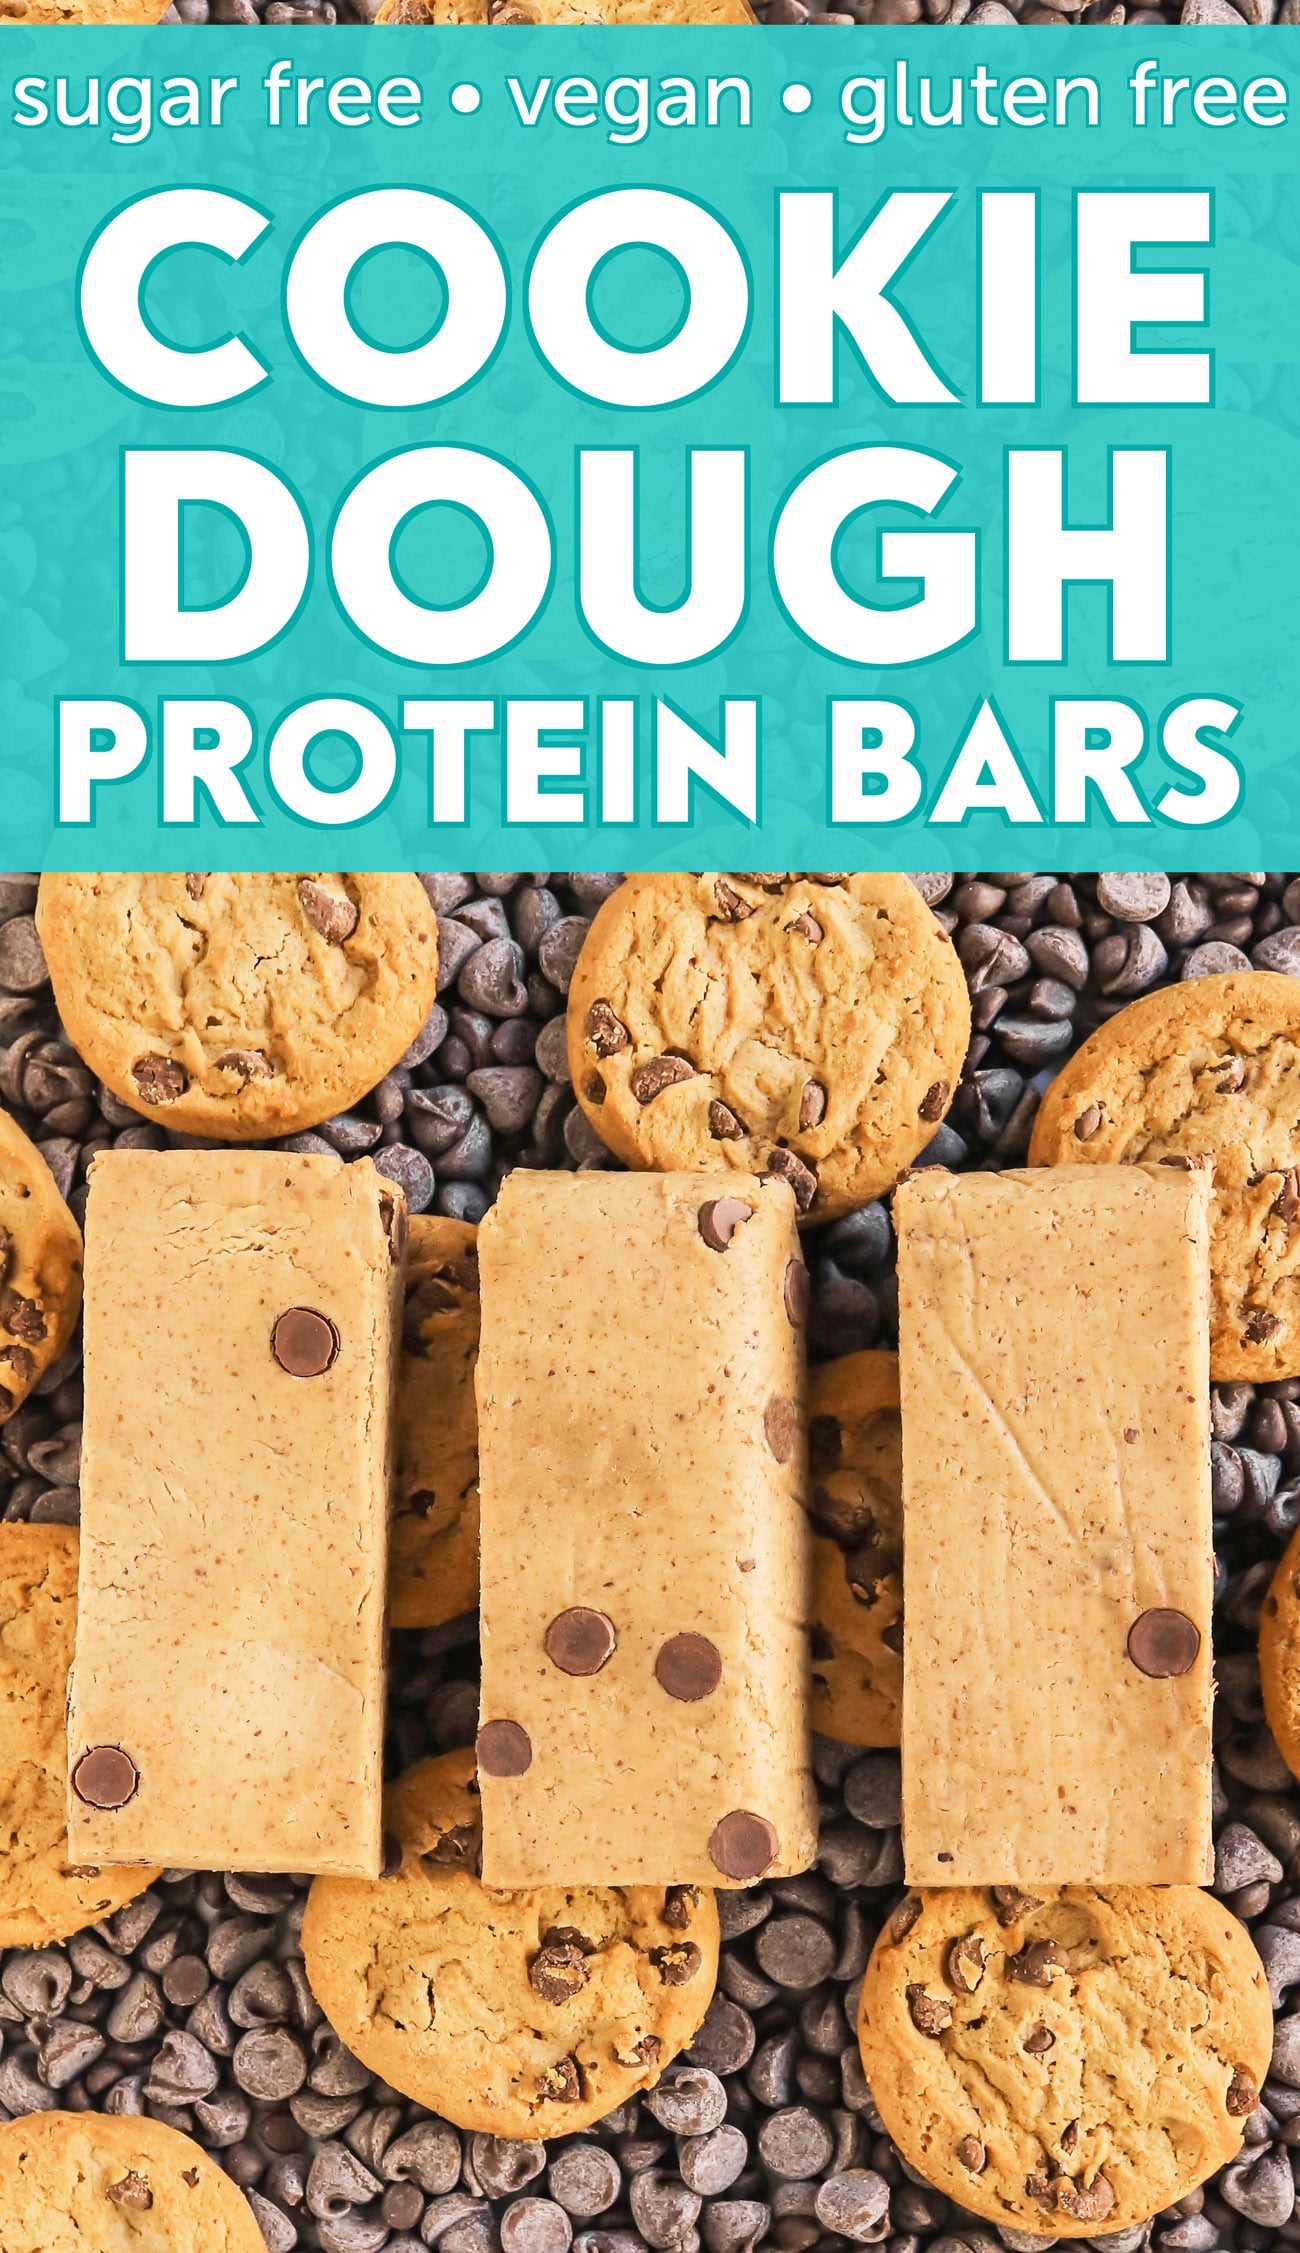 Tired of shelling out cash for protein bars at the store? Make these Cookie Dough Protein Bars instead, thanks to The DIY Protein Bars Cookbook -- 48 no-bake homemade protein bars recipes to satisfy your sweet tooth! With sugar free, gluten free, dairy free, and vegan options.